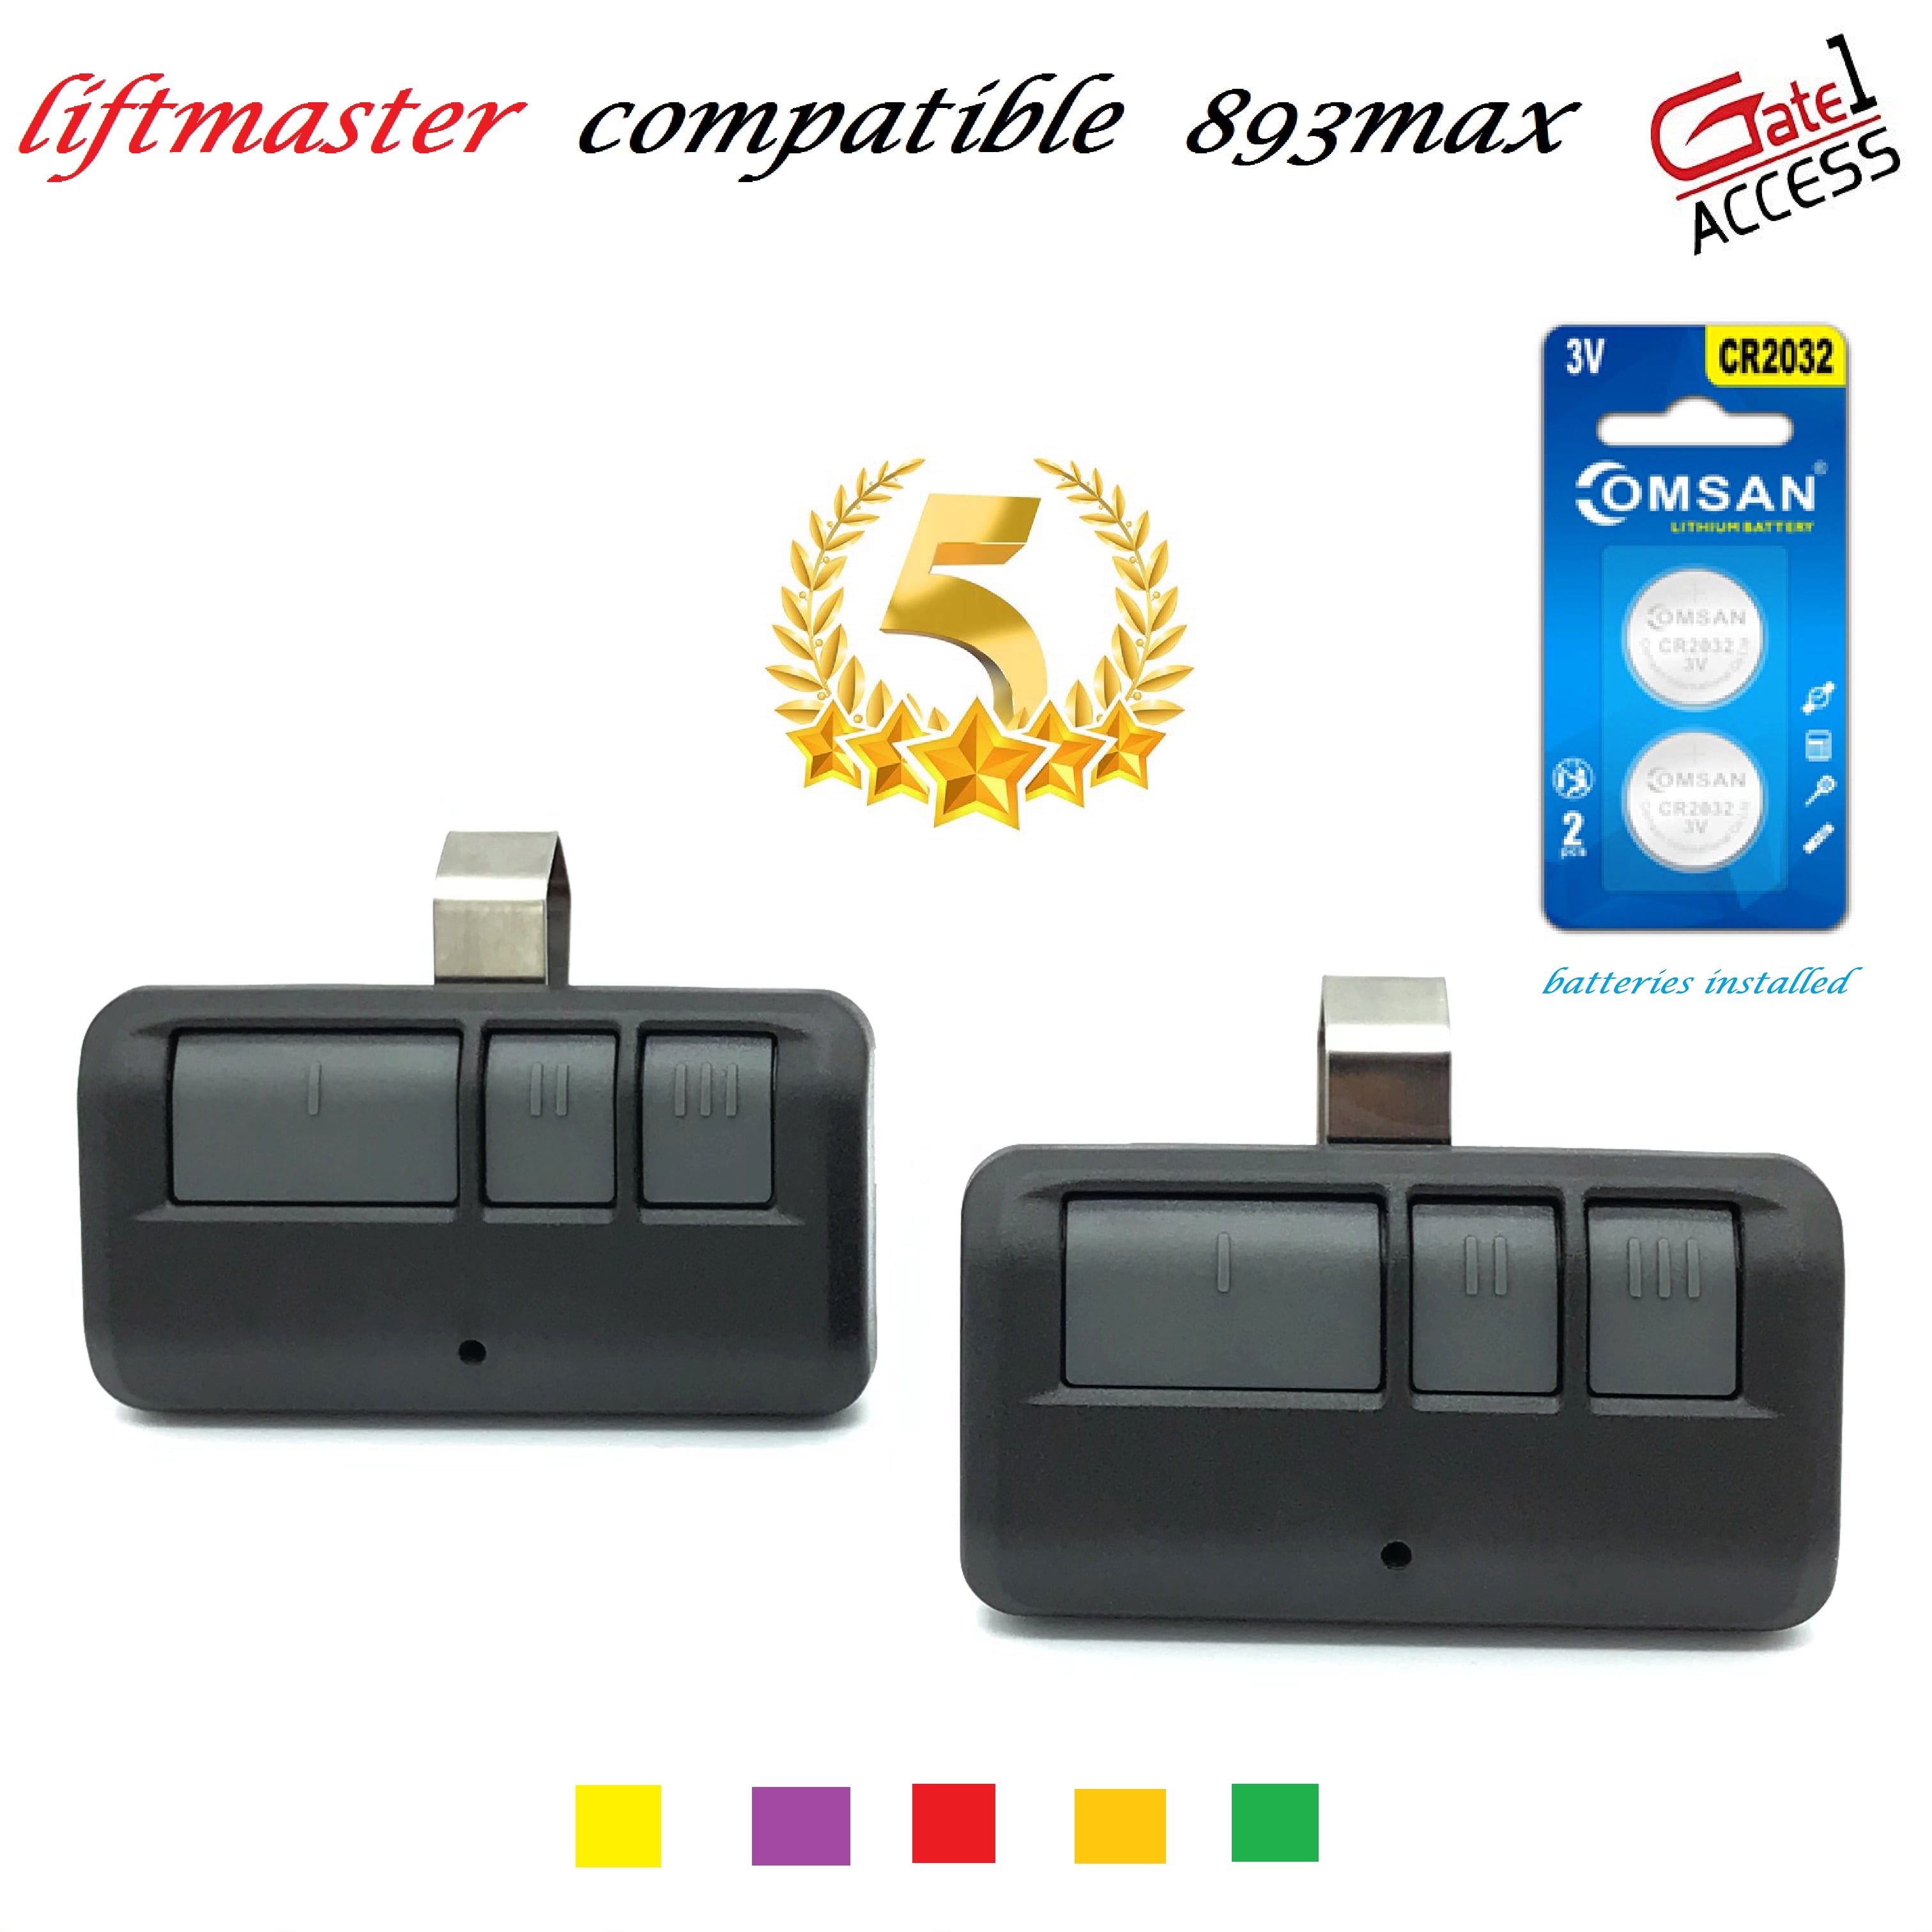 LIFTMASTER Garage door Opener Remote Control For 371LM 81LM 971LM 893MAX 895MAX 